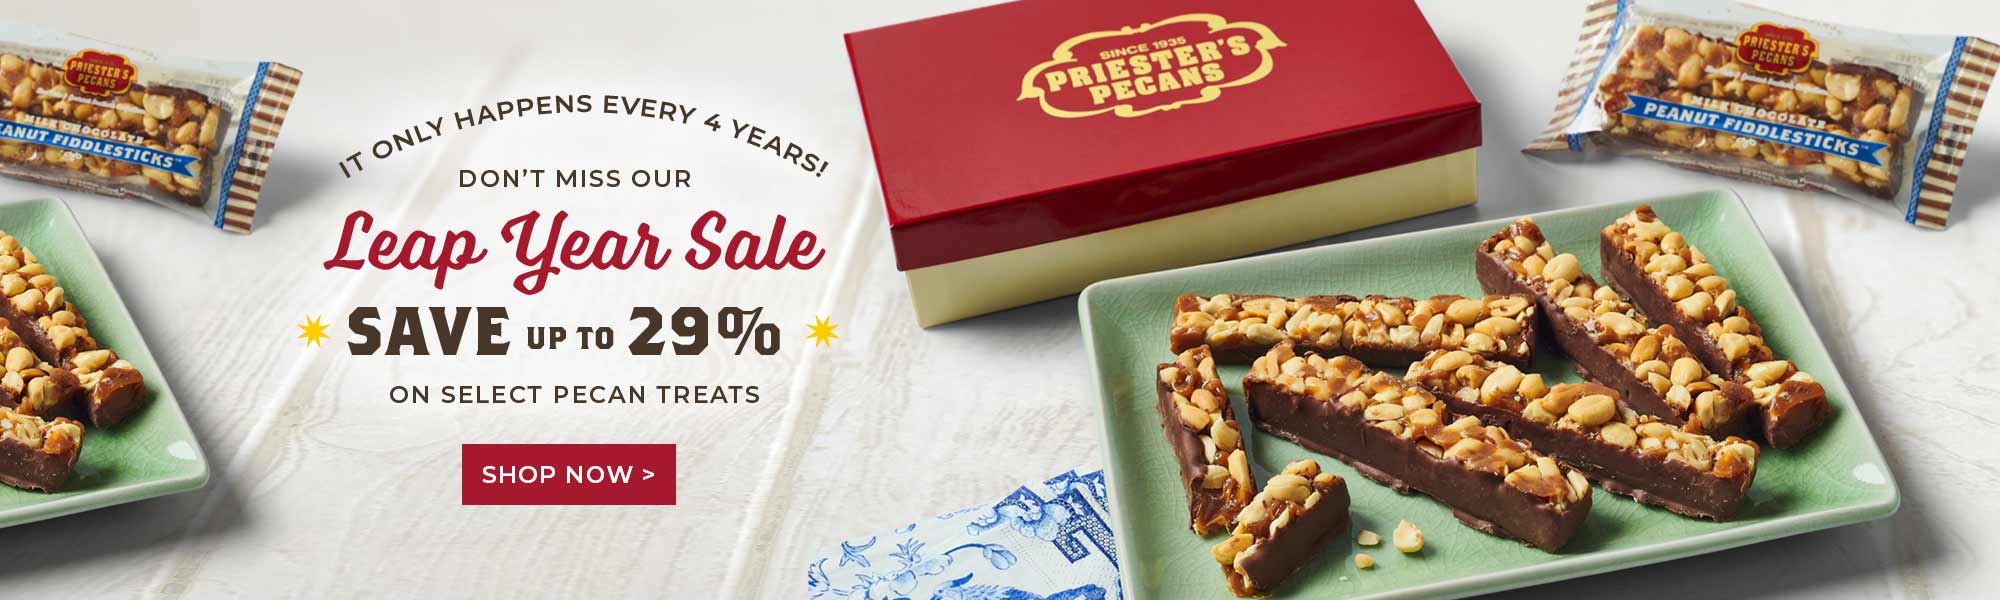 DON'T MISS OUR Leap Year Sale * SAVE up to 29% * ON SELECT PECAN TREATS